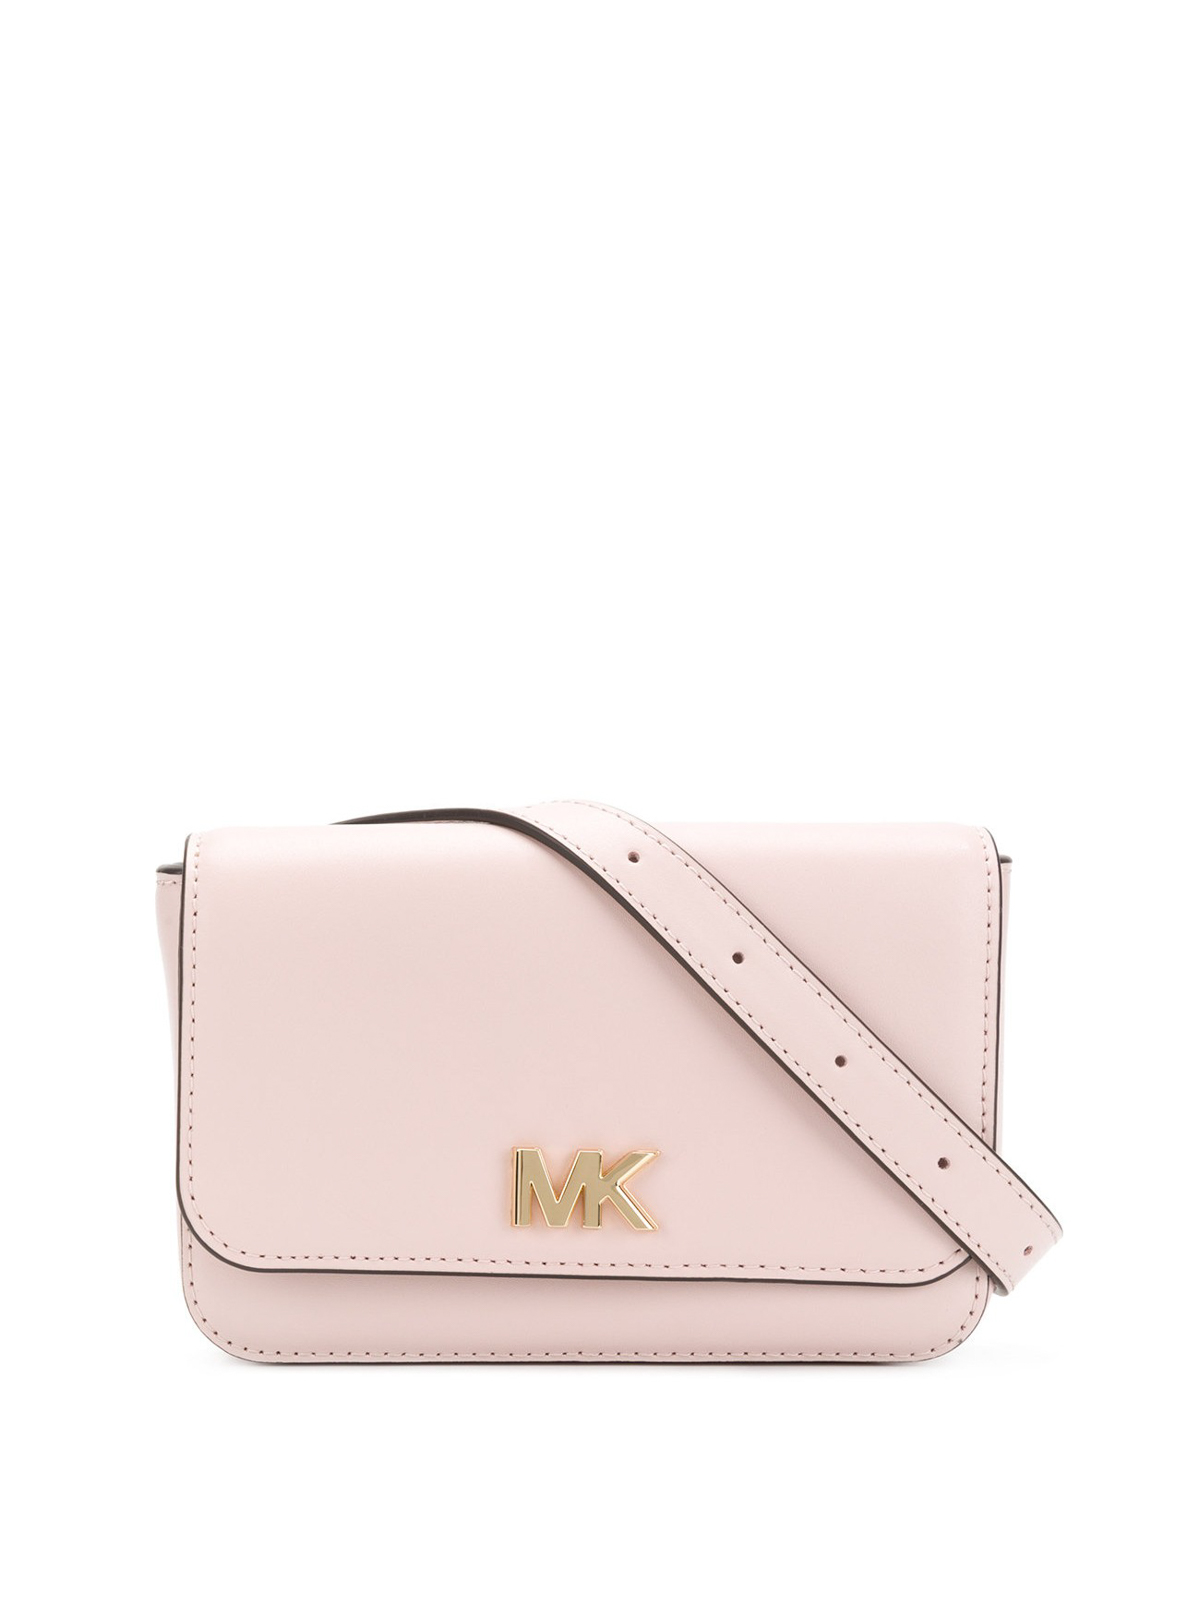 michael kors pink and white purse